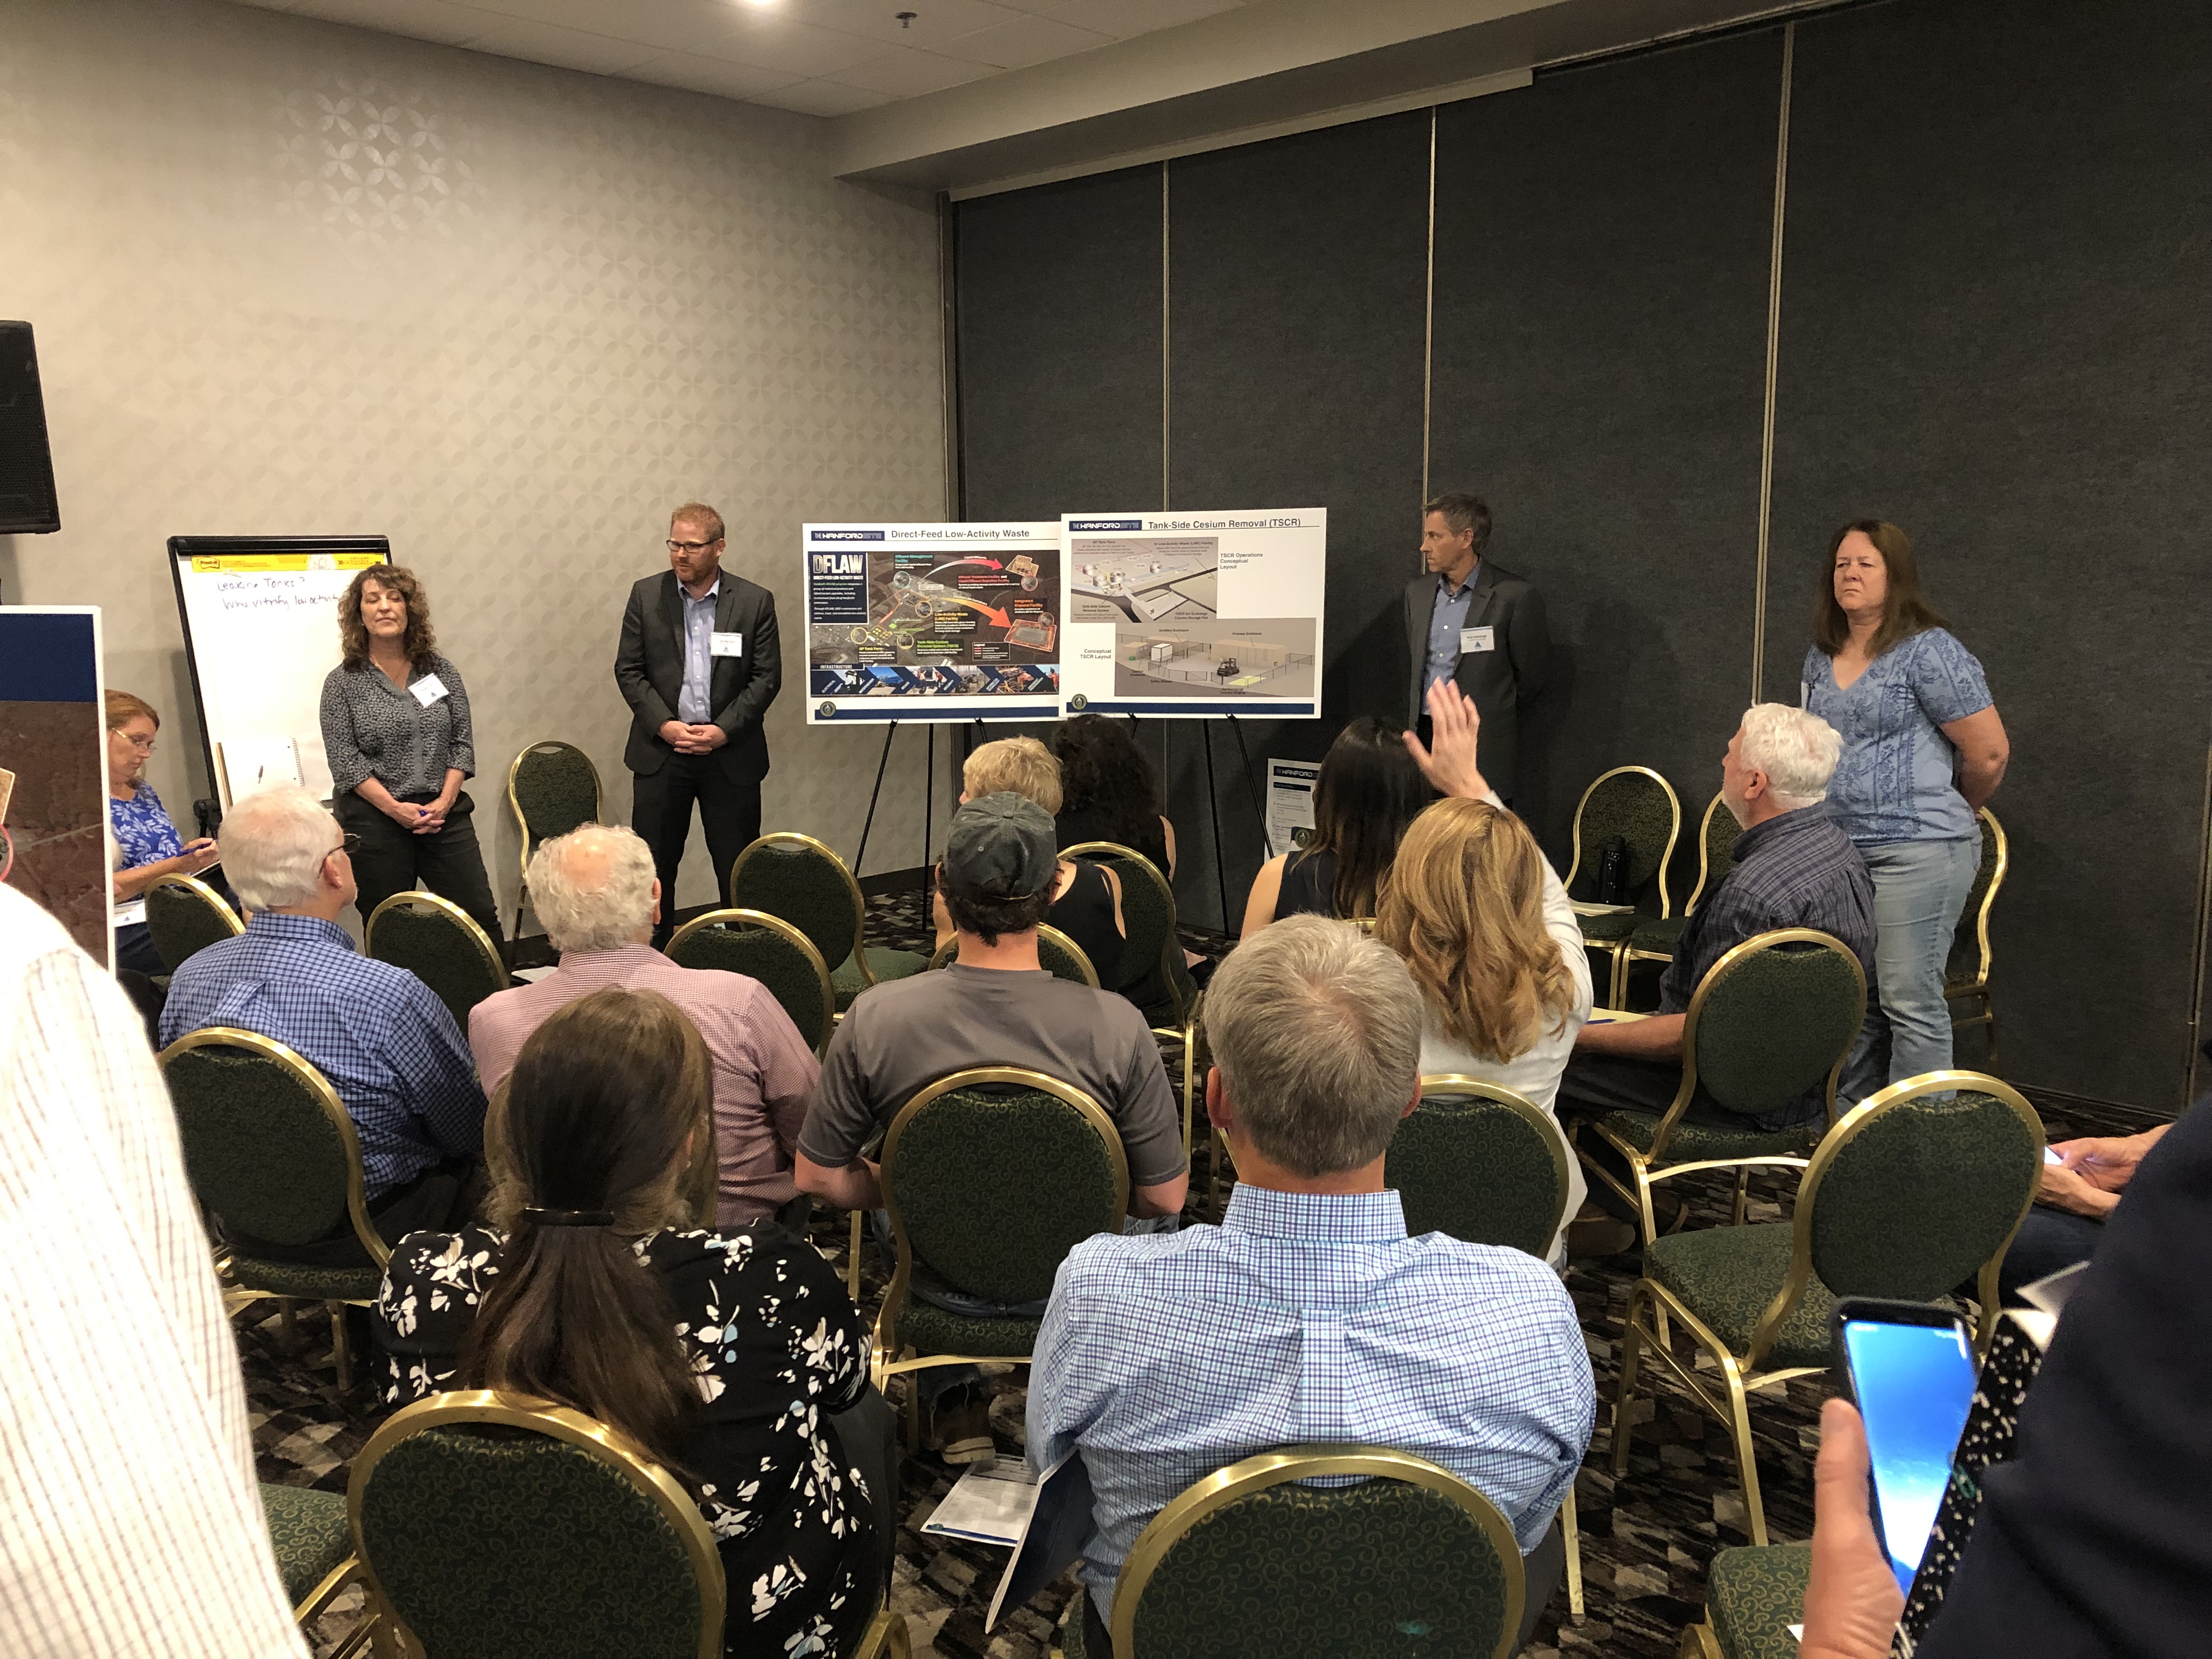 The last in-person public meeting about Hanford cleanup was in Richland in 2019